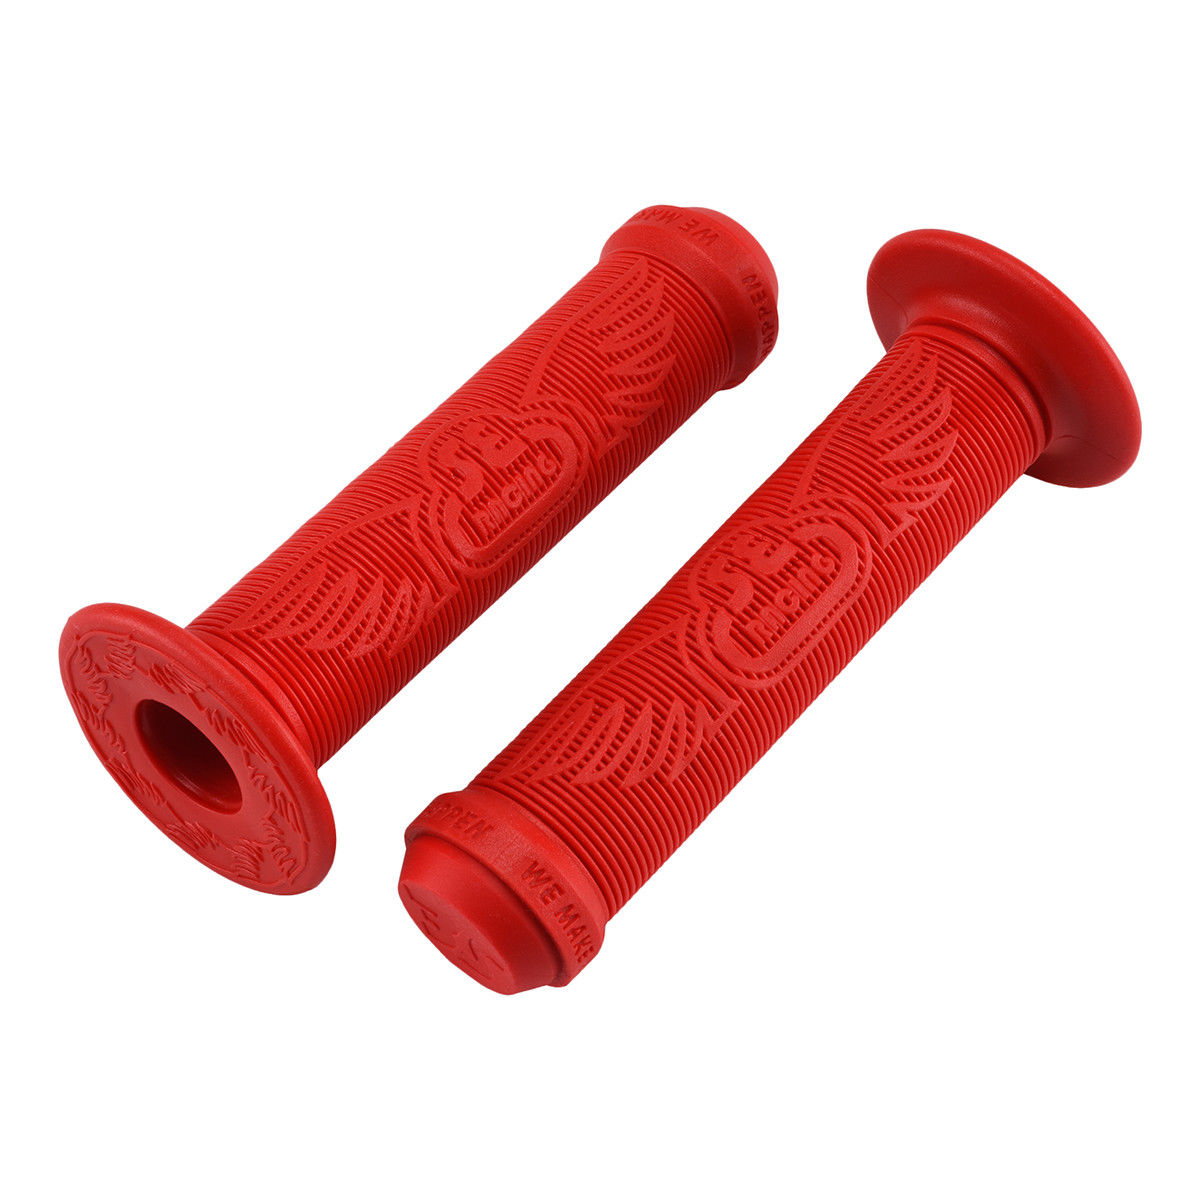 SE Racing Wing BMX Grips - Flanged - Red